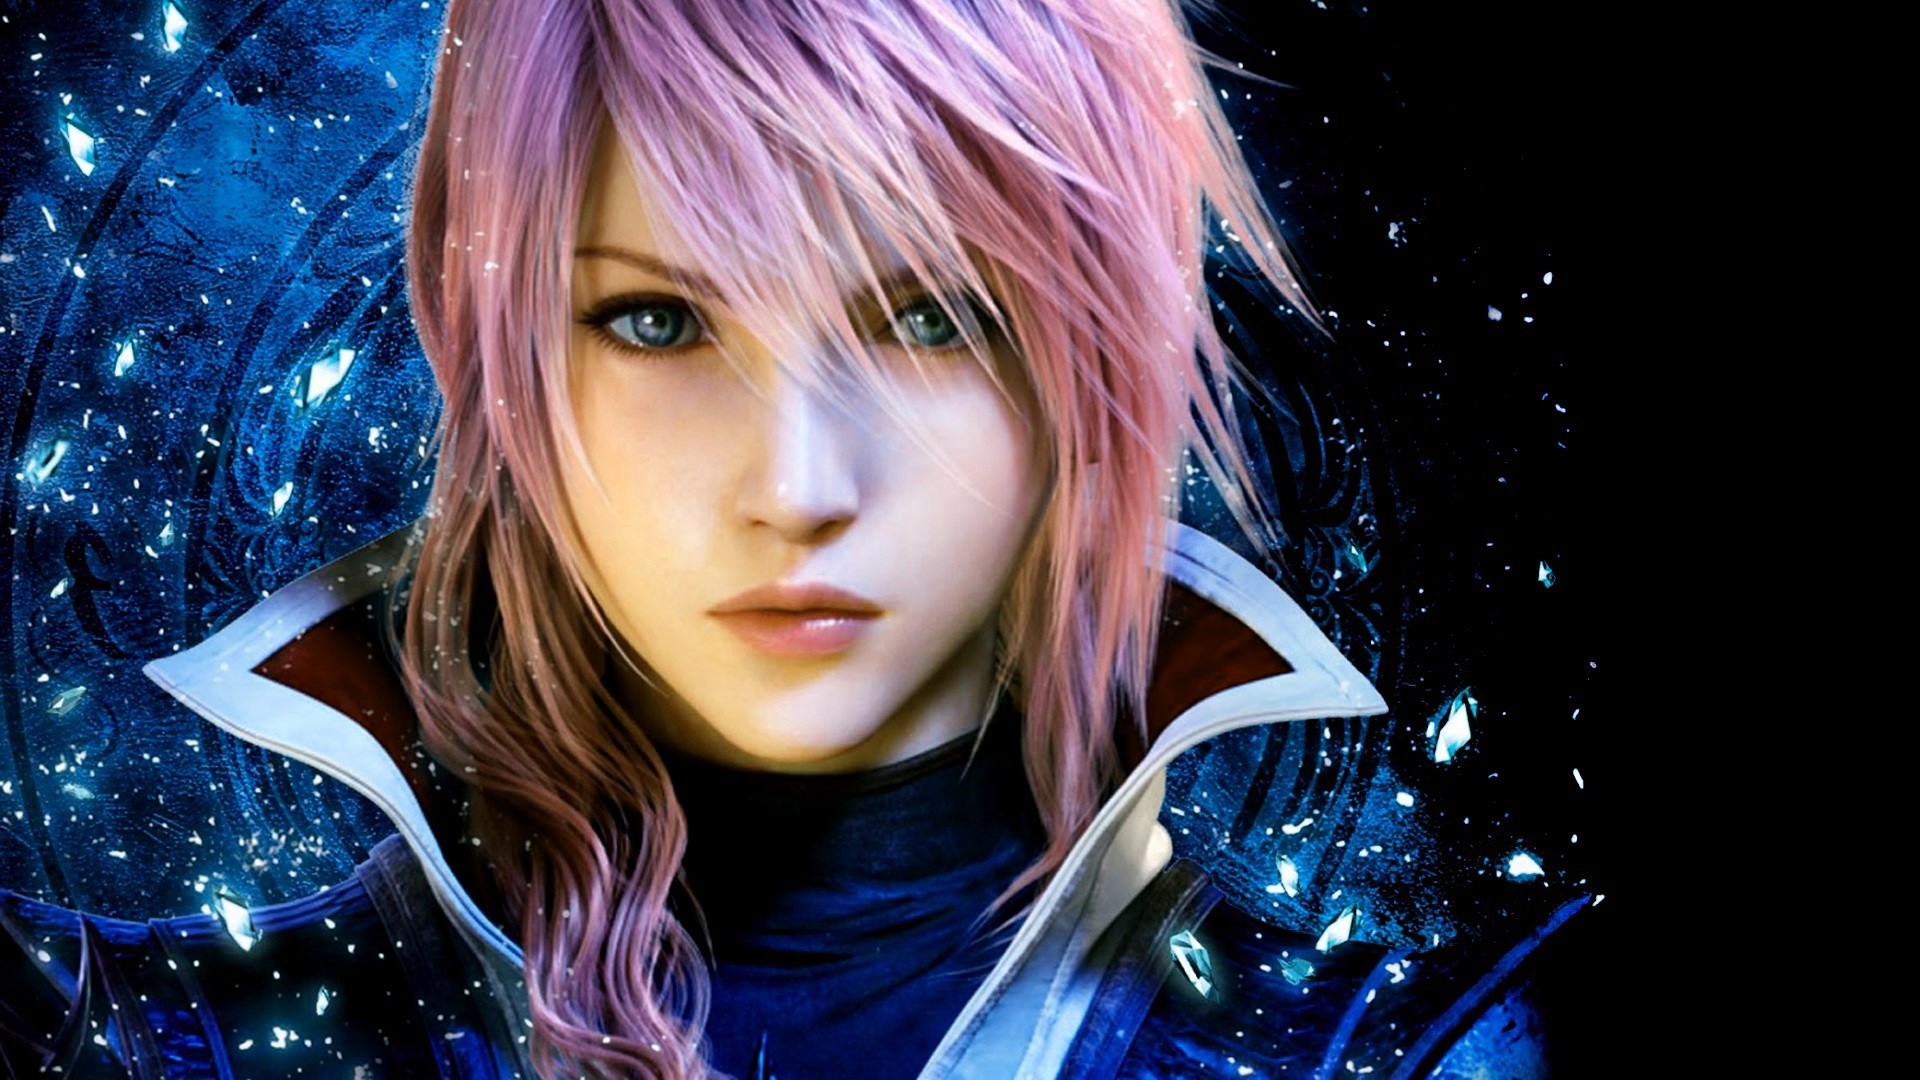 Lightning Returns Final Fantasy XIII Photos,HD Wallpapers,Images .